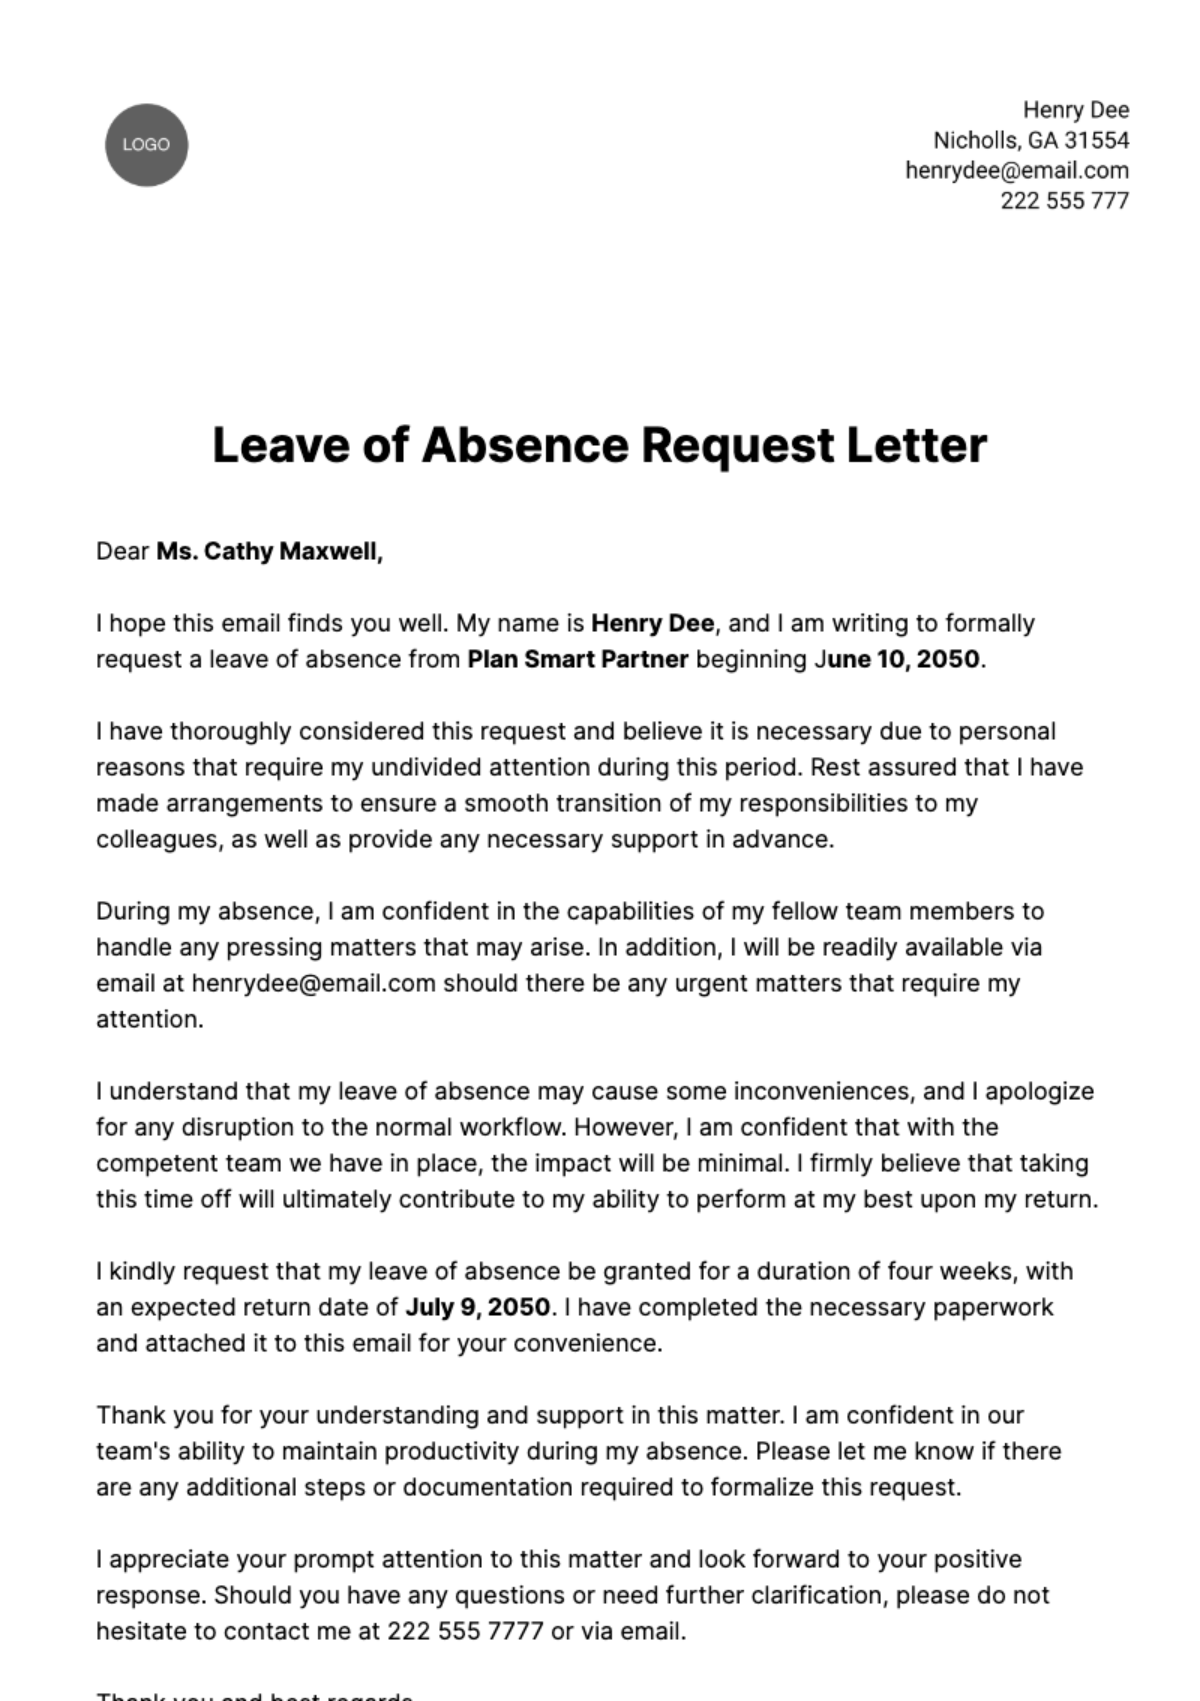 Free Leave of Absence Request Letter  Template